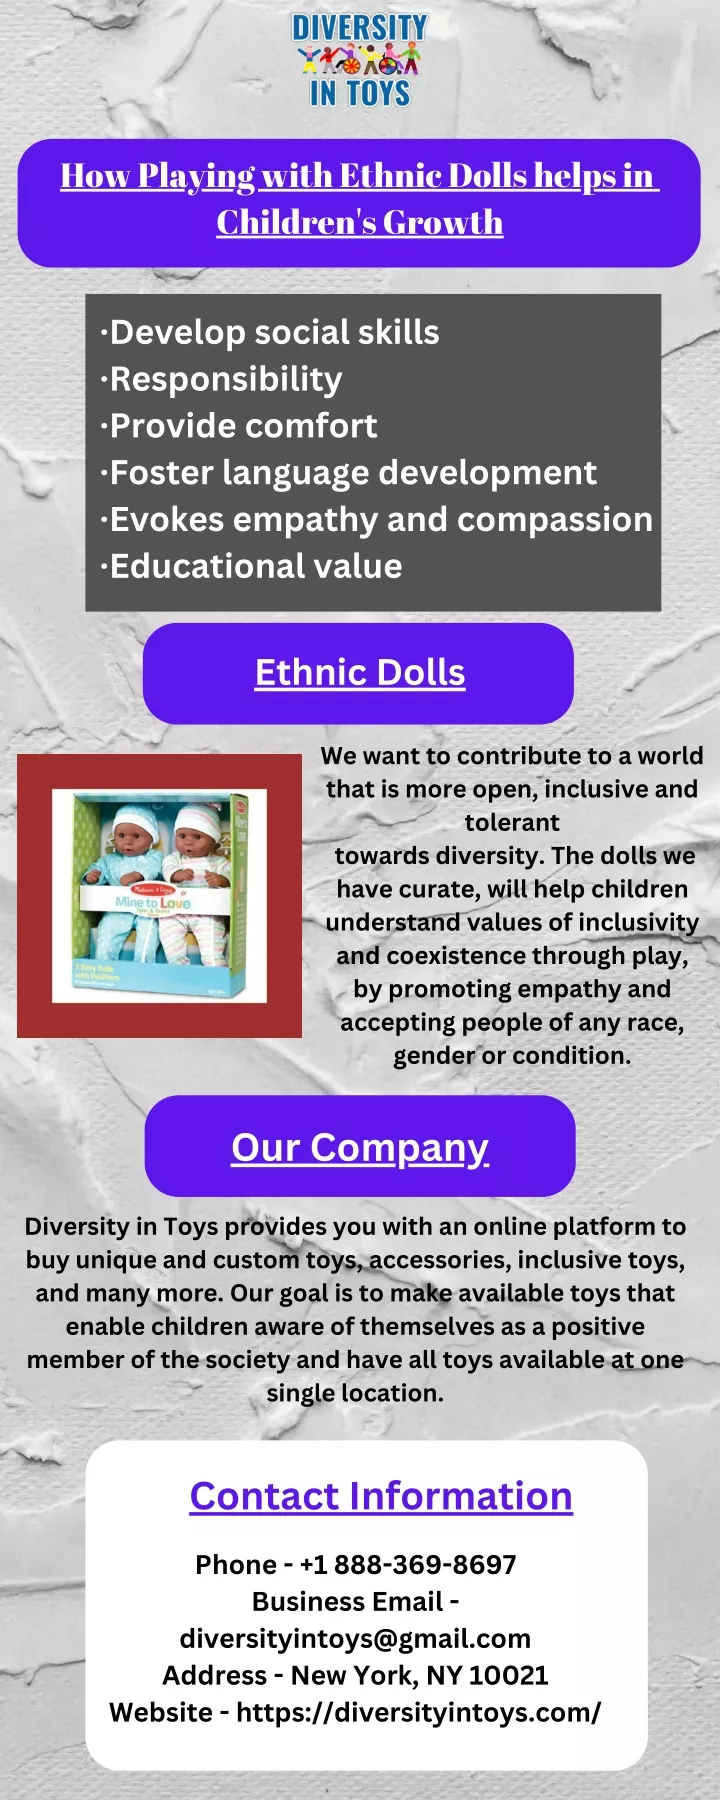 how playing with ethnic dolls helps in children